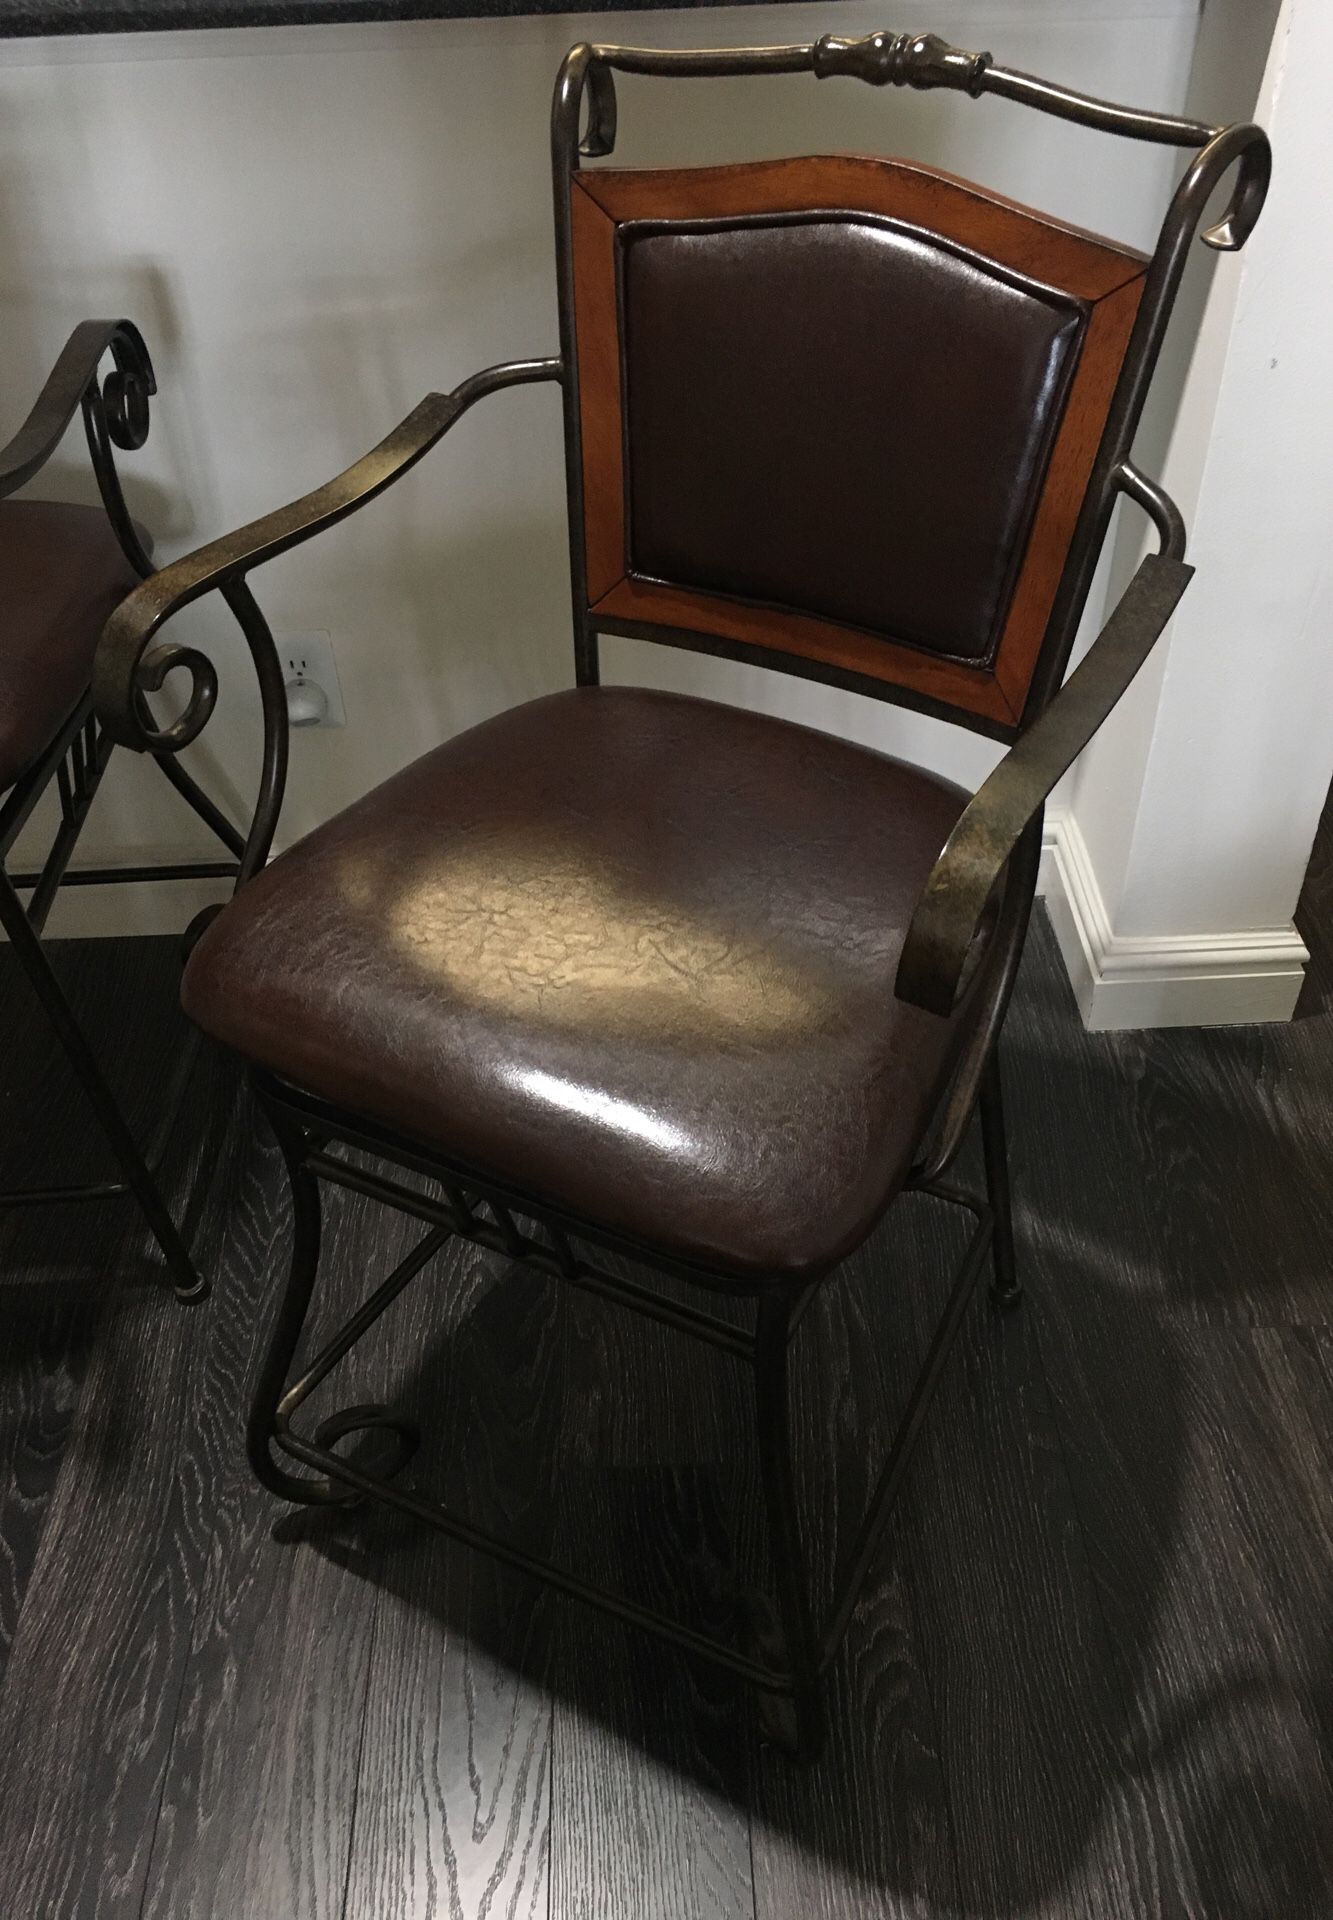 Two counter-height chairs. Brown rustic metallic frame and brown leather padding